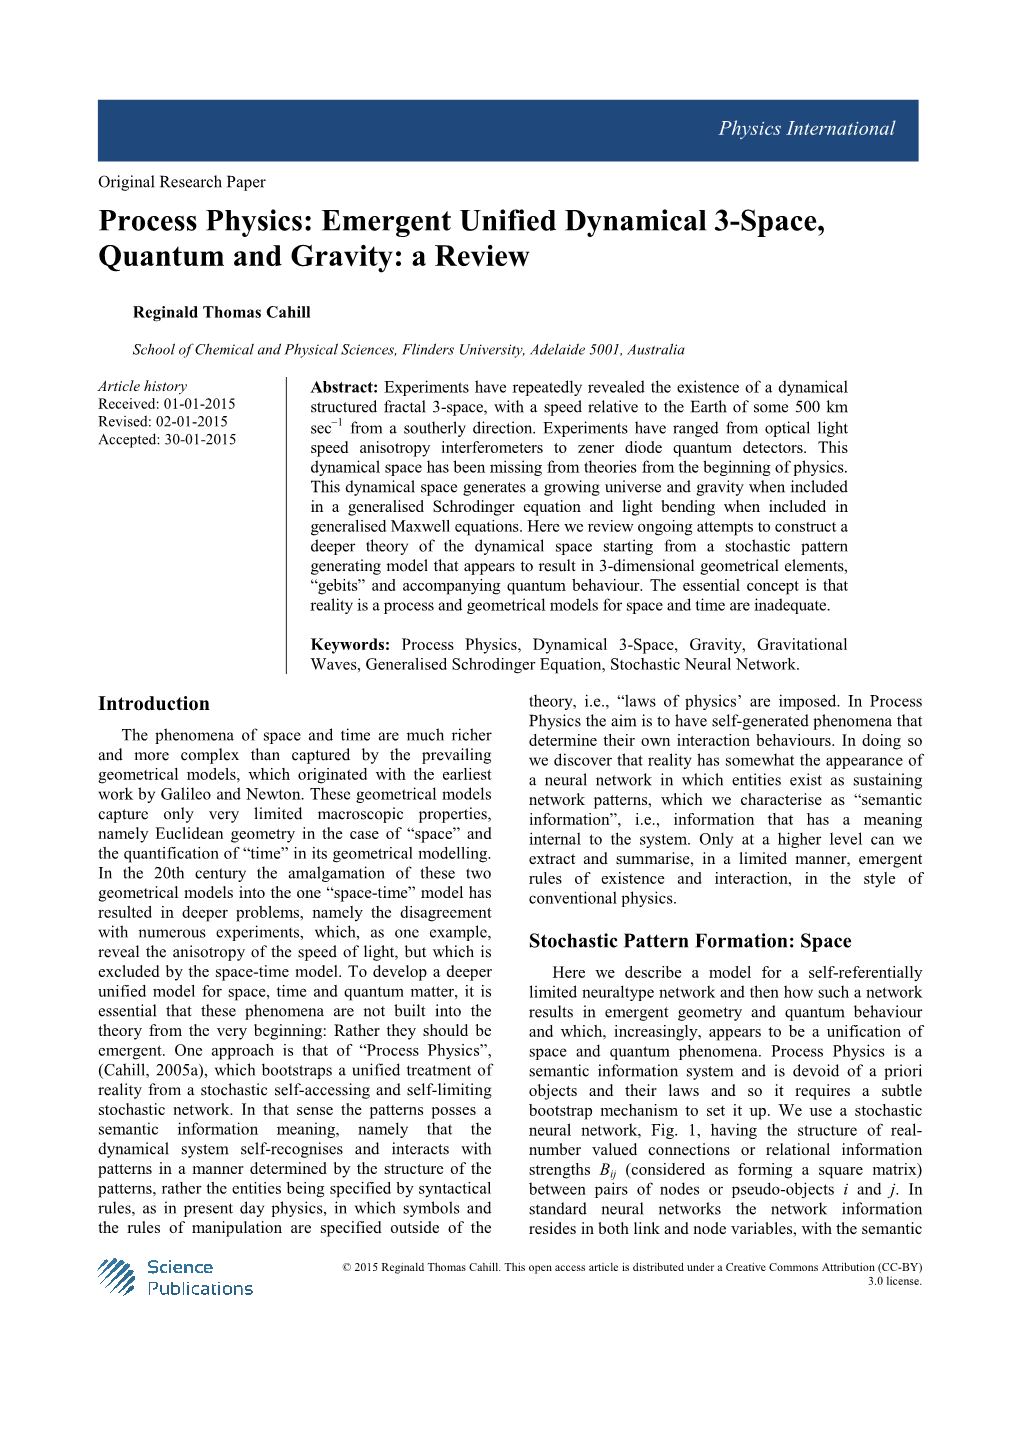 Process Physics: Emergent Unified Dynamical 3-Space, Quantum and Gravity: a Review